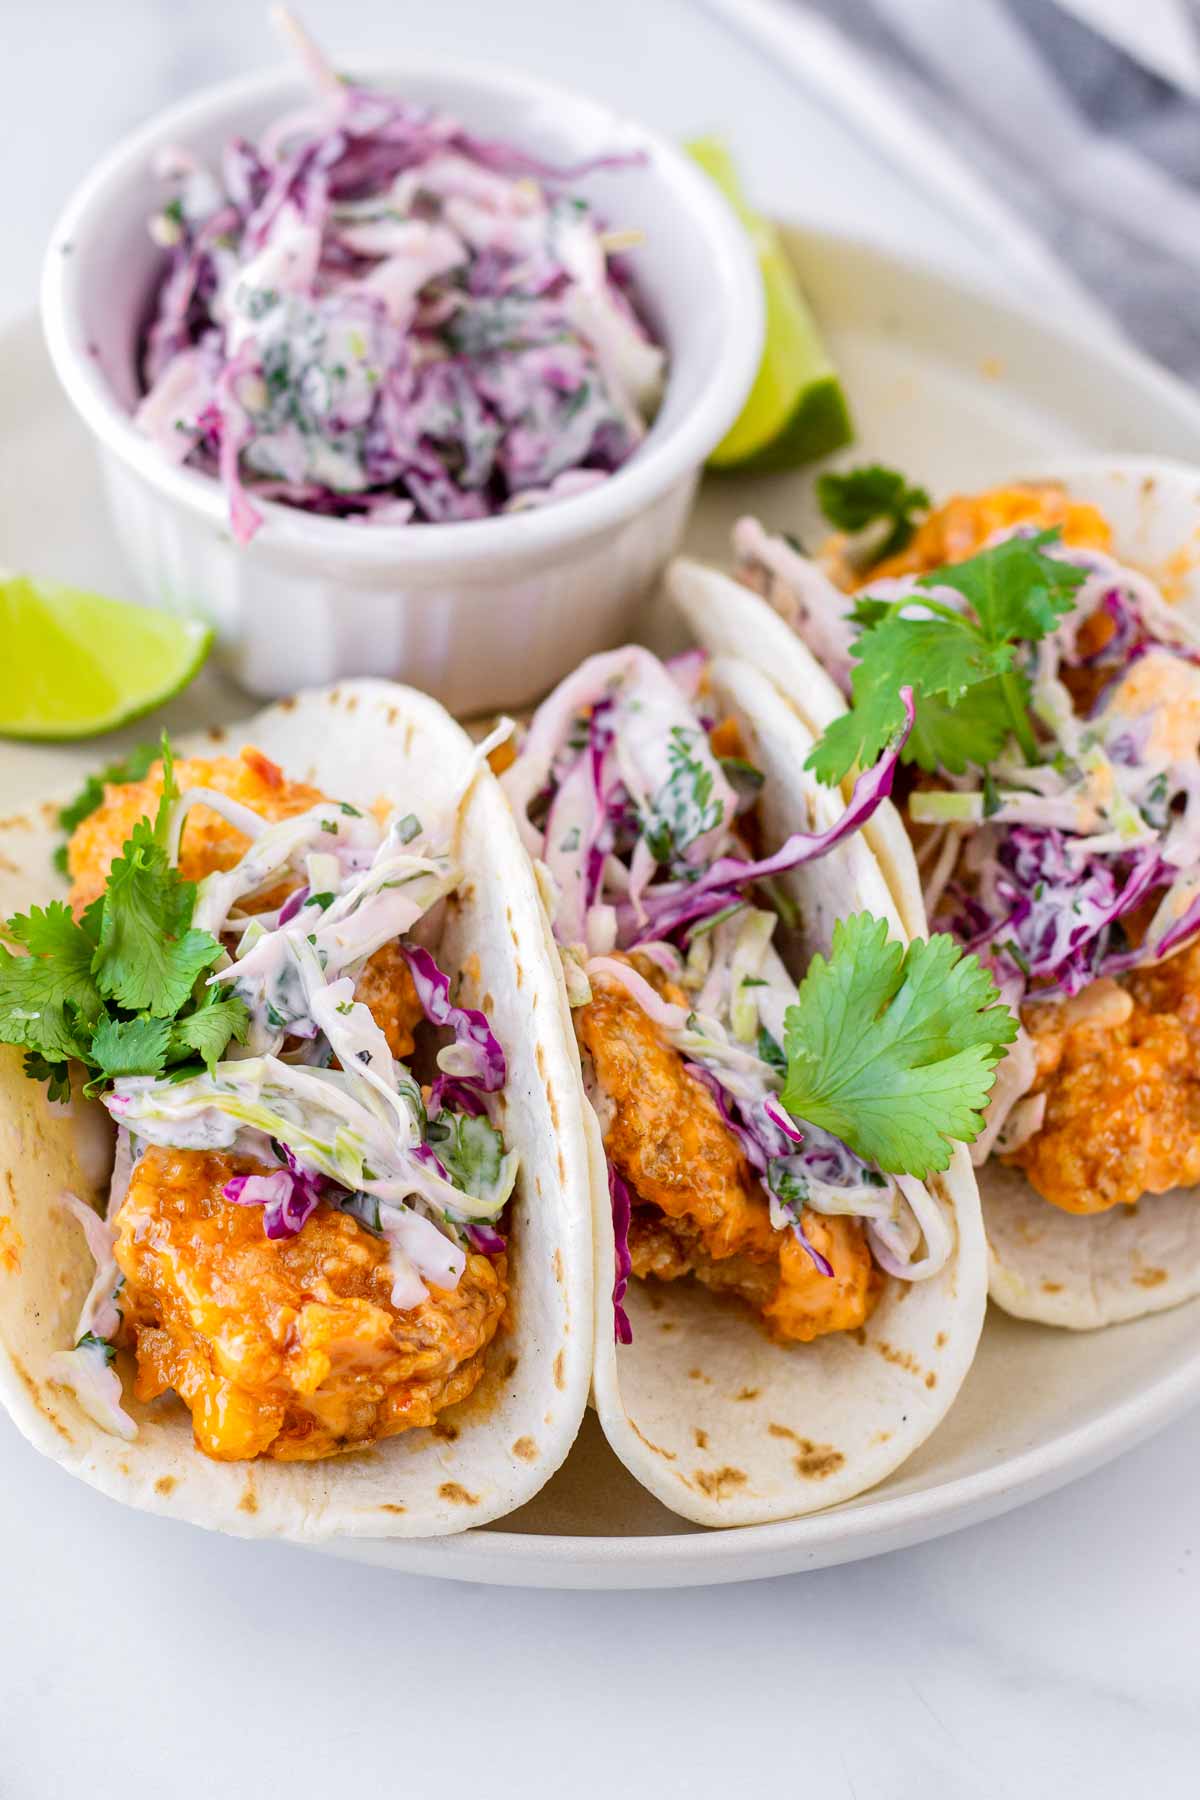 three folded tacos served on a plate with a side of slaw